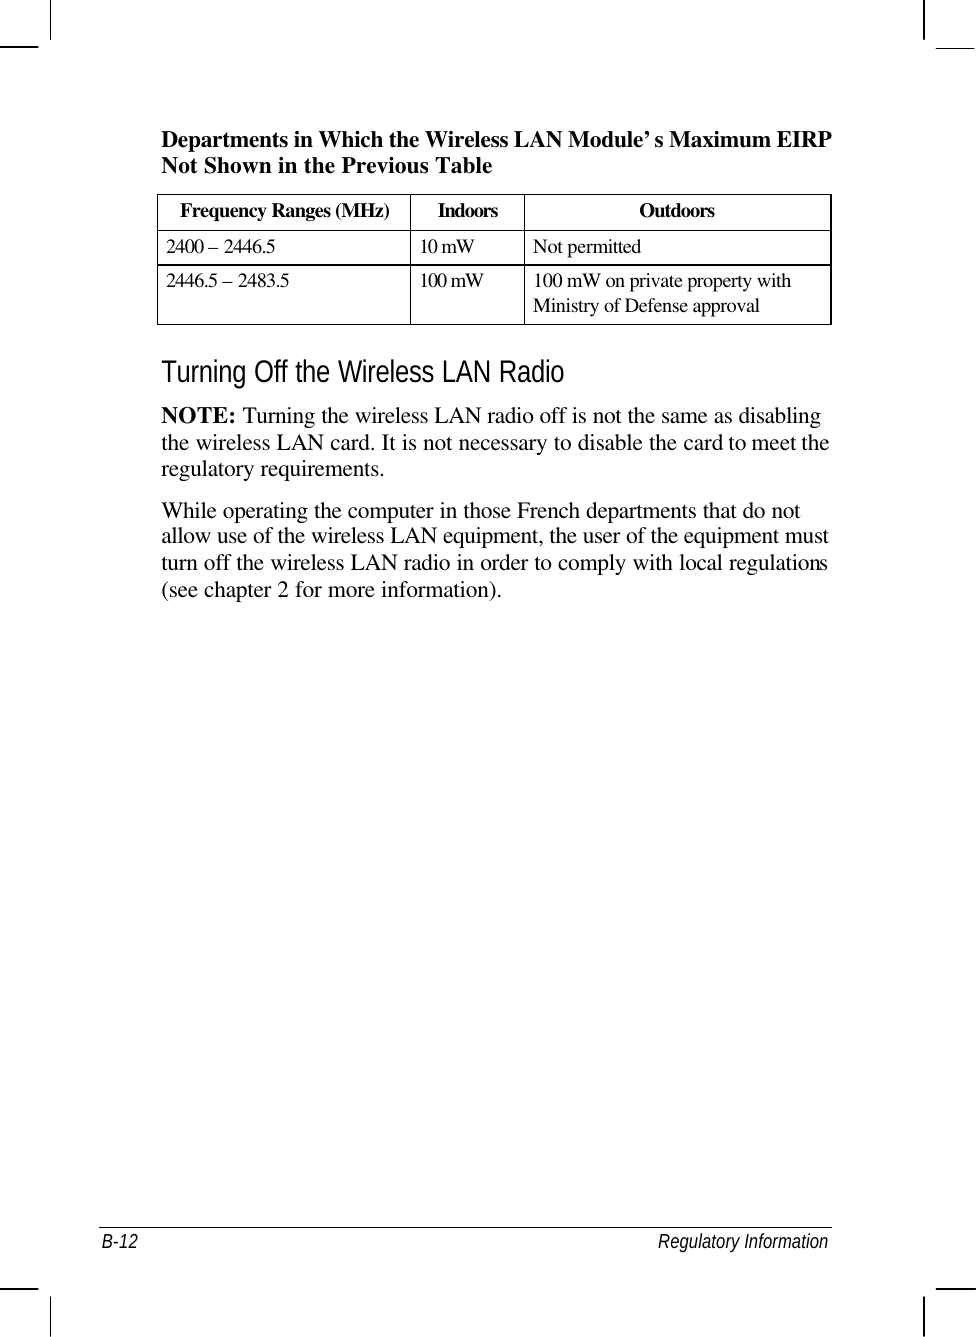  B-12 Regulatory Information Departments in Which the Wireless LAN Module’s Maximum EIRP Not Shown in the Previous Table Frequency Ranges (MHz) Indoors Outdoors 2400 – 2446.5 10 mW Not permitted 2446.5 – 2483.5 100 mW 100 mW on private property with Ministry of Defense approval  Turning Off the Wireless LAN Radio NOTE: Turning the wireless LAN radio off is not the same as disabling the wireless LAN card. It is not necessary to disable the card to meet the regulatory requirements. While operating the computer in those French departments that do not allow use of the wireless LAN equipment, the user of the equipment must turn off the wireless LAN radio in order to comply with local regulations (see chapter 2 for more information).  